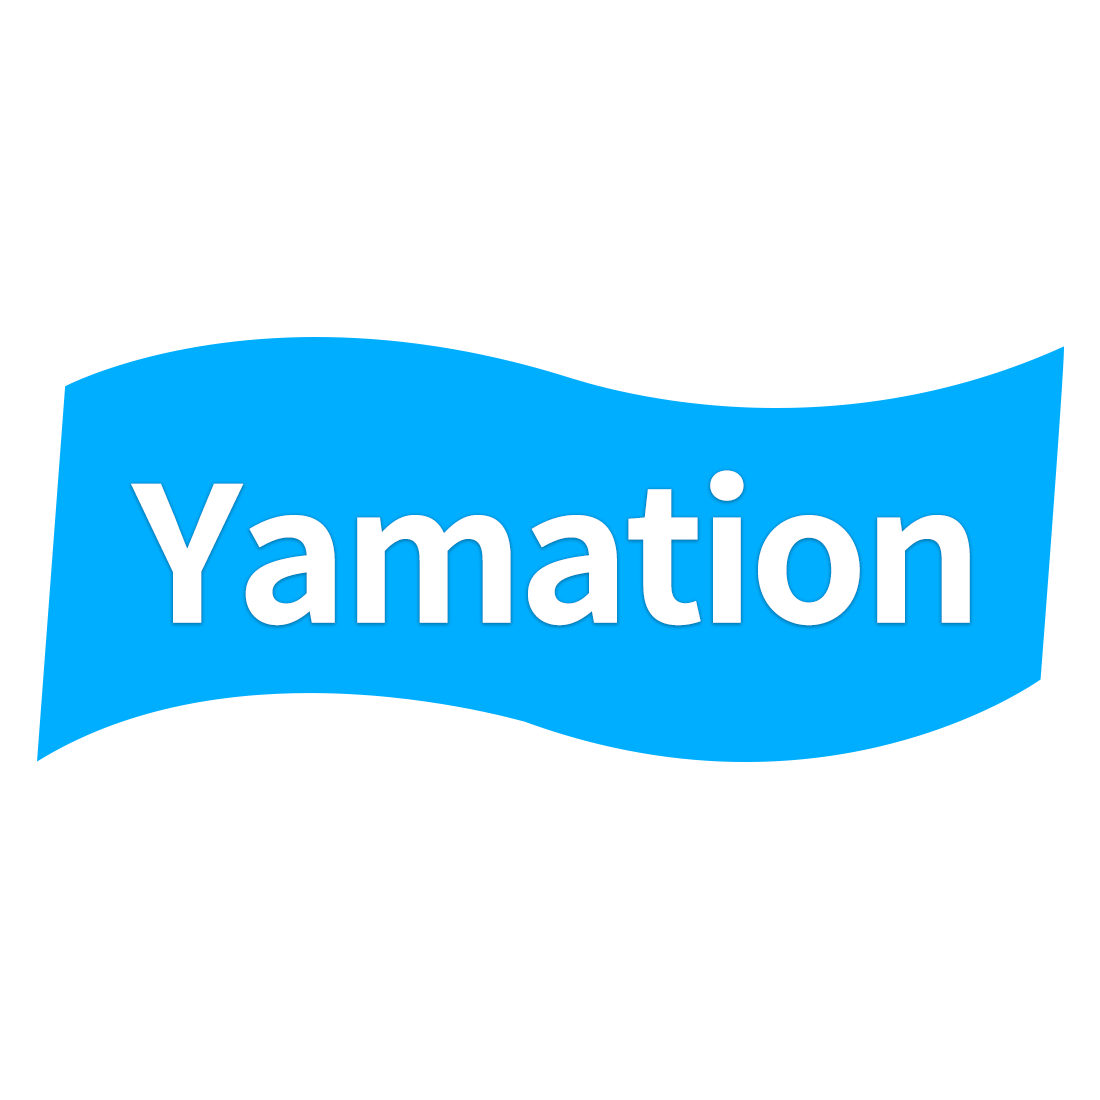 Yamation DTF Transfer Film: A3 (11.7 x 16.5) 15 Sheets Premium